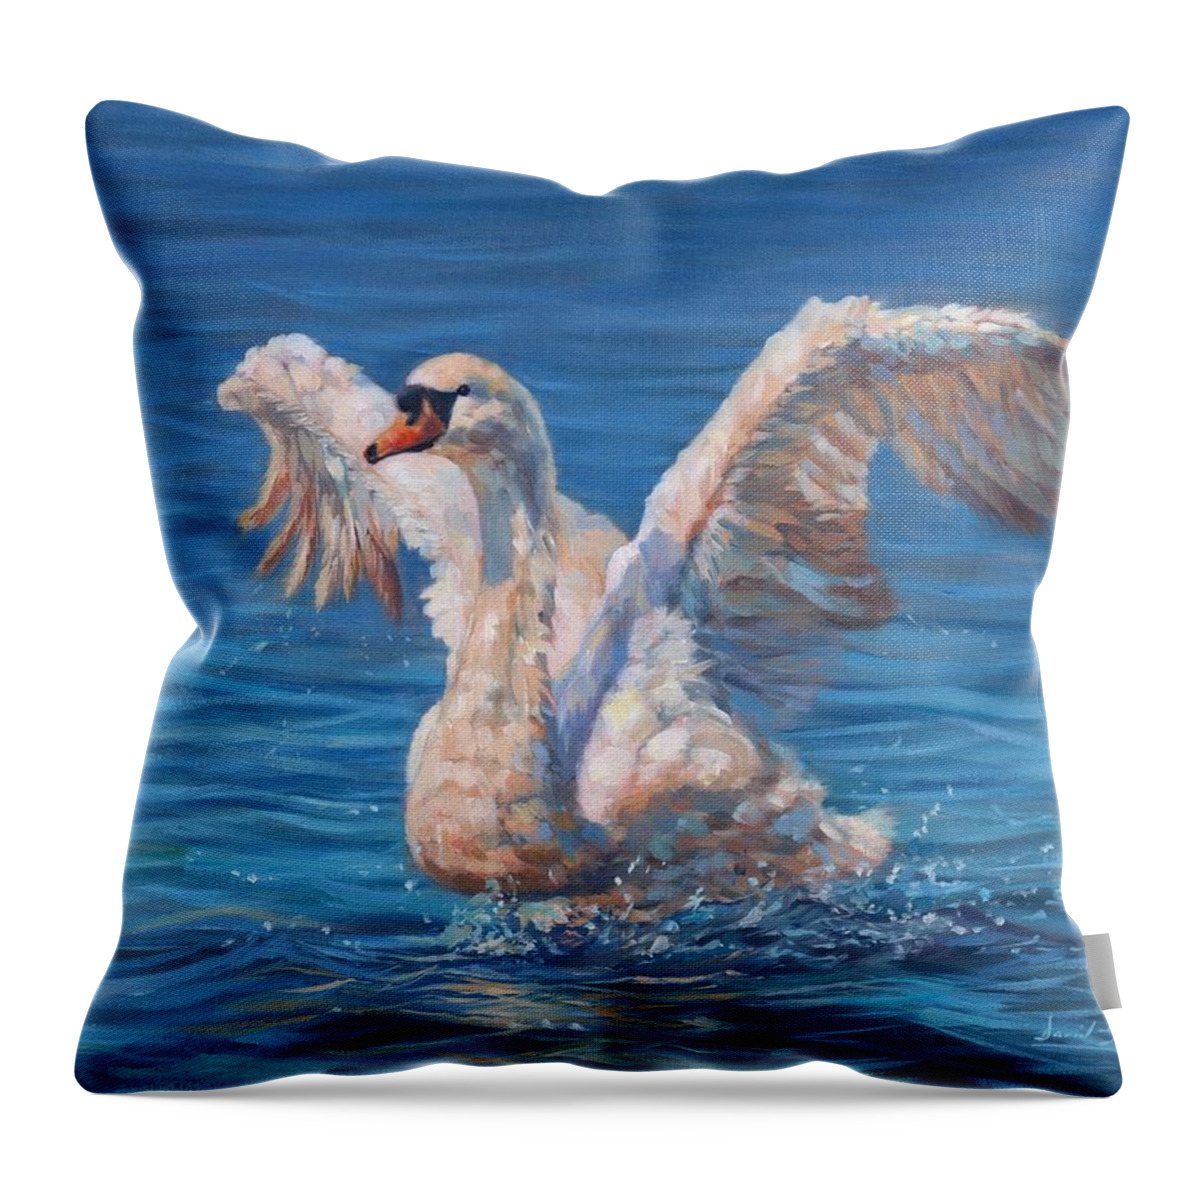 Swan Throw Pillow featuring the painting Swan by David Stribbling